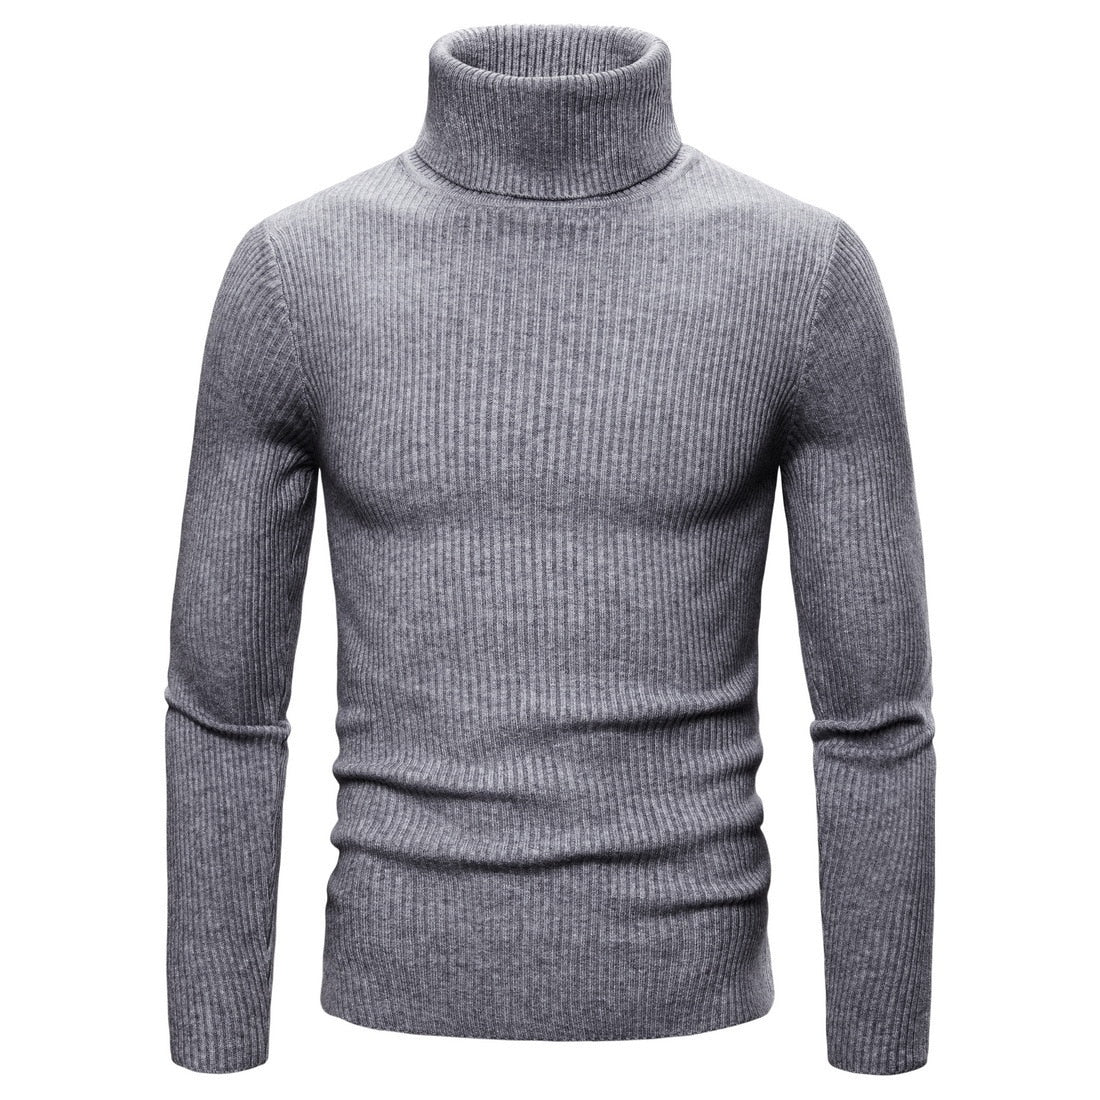 Men's All-Match Knitted Turtleneck Sweater